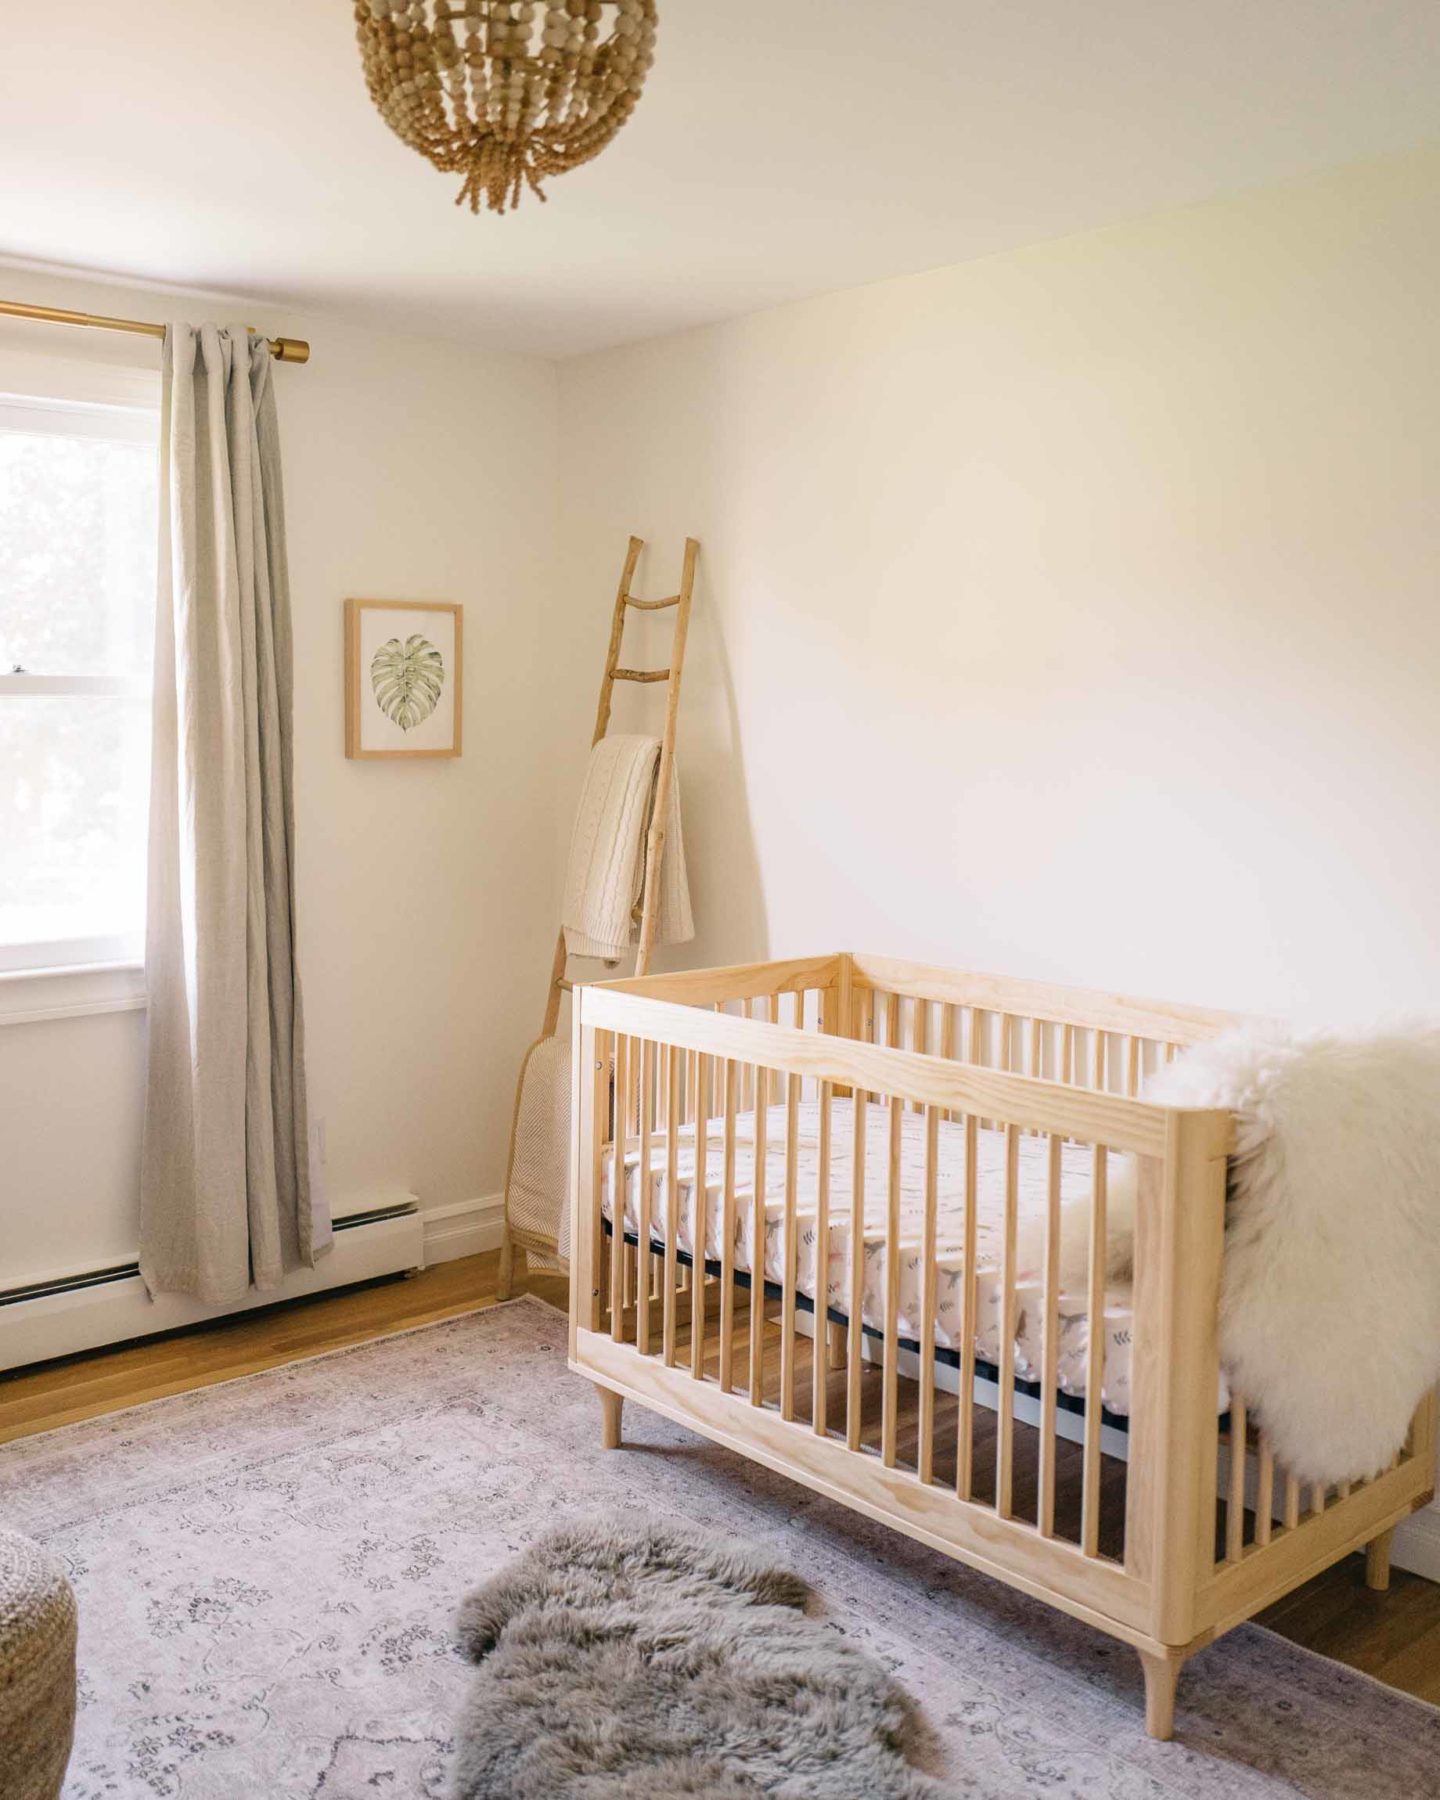 Jess Ann Kirby's gender neutral crib is a light wood with cozy textures perfect for baby.